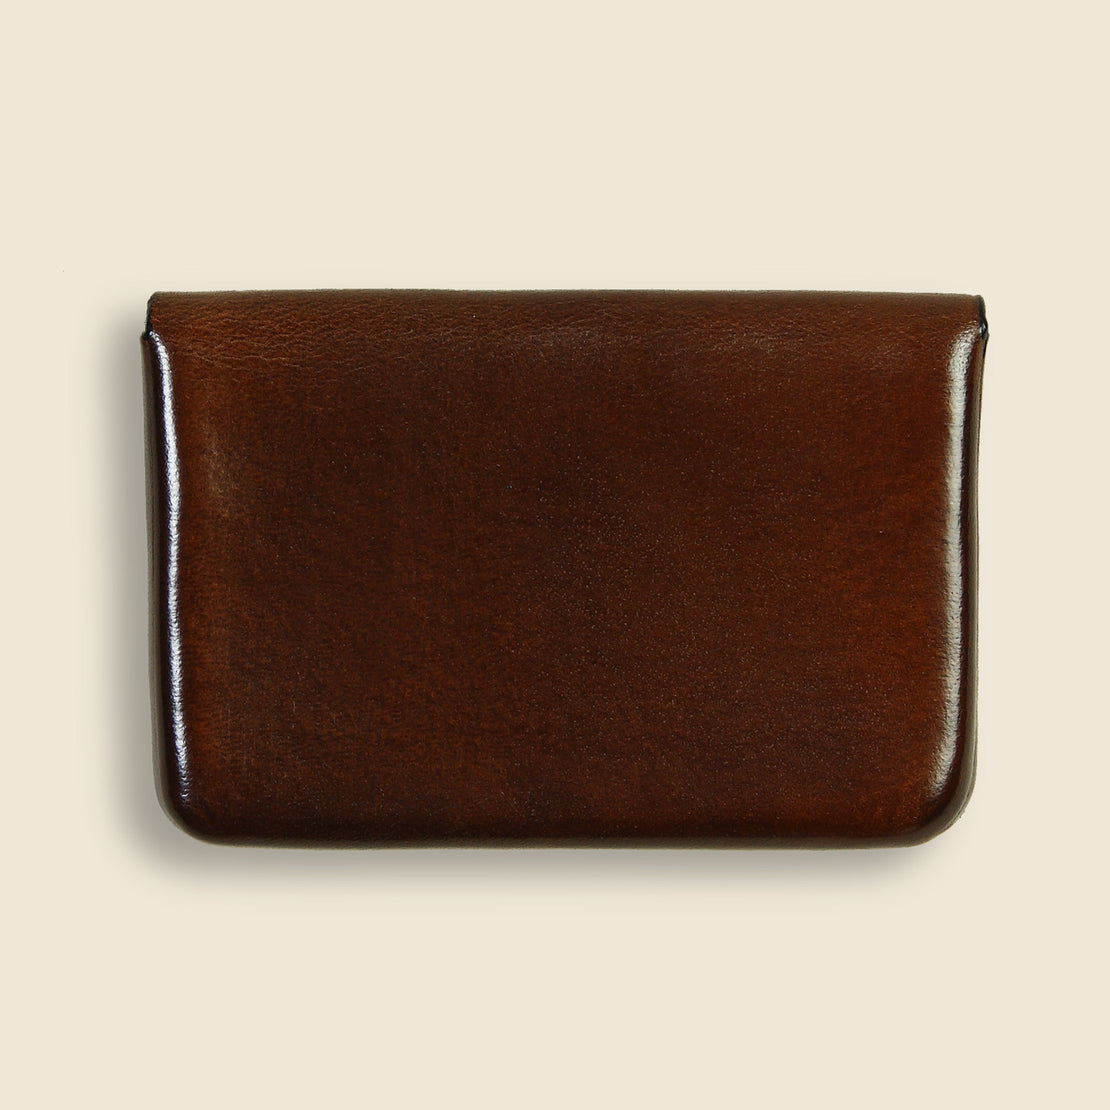 Business Card Holder - Dark Brown - Il Bussetto - STAG Provisions - Accessories - Wallets